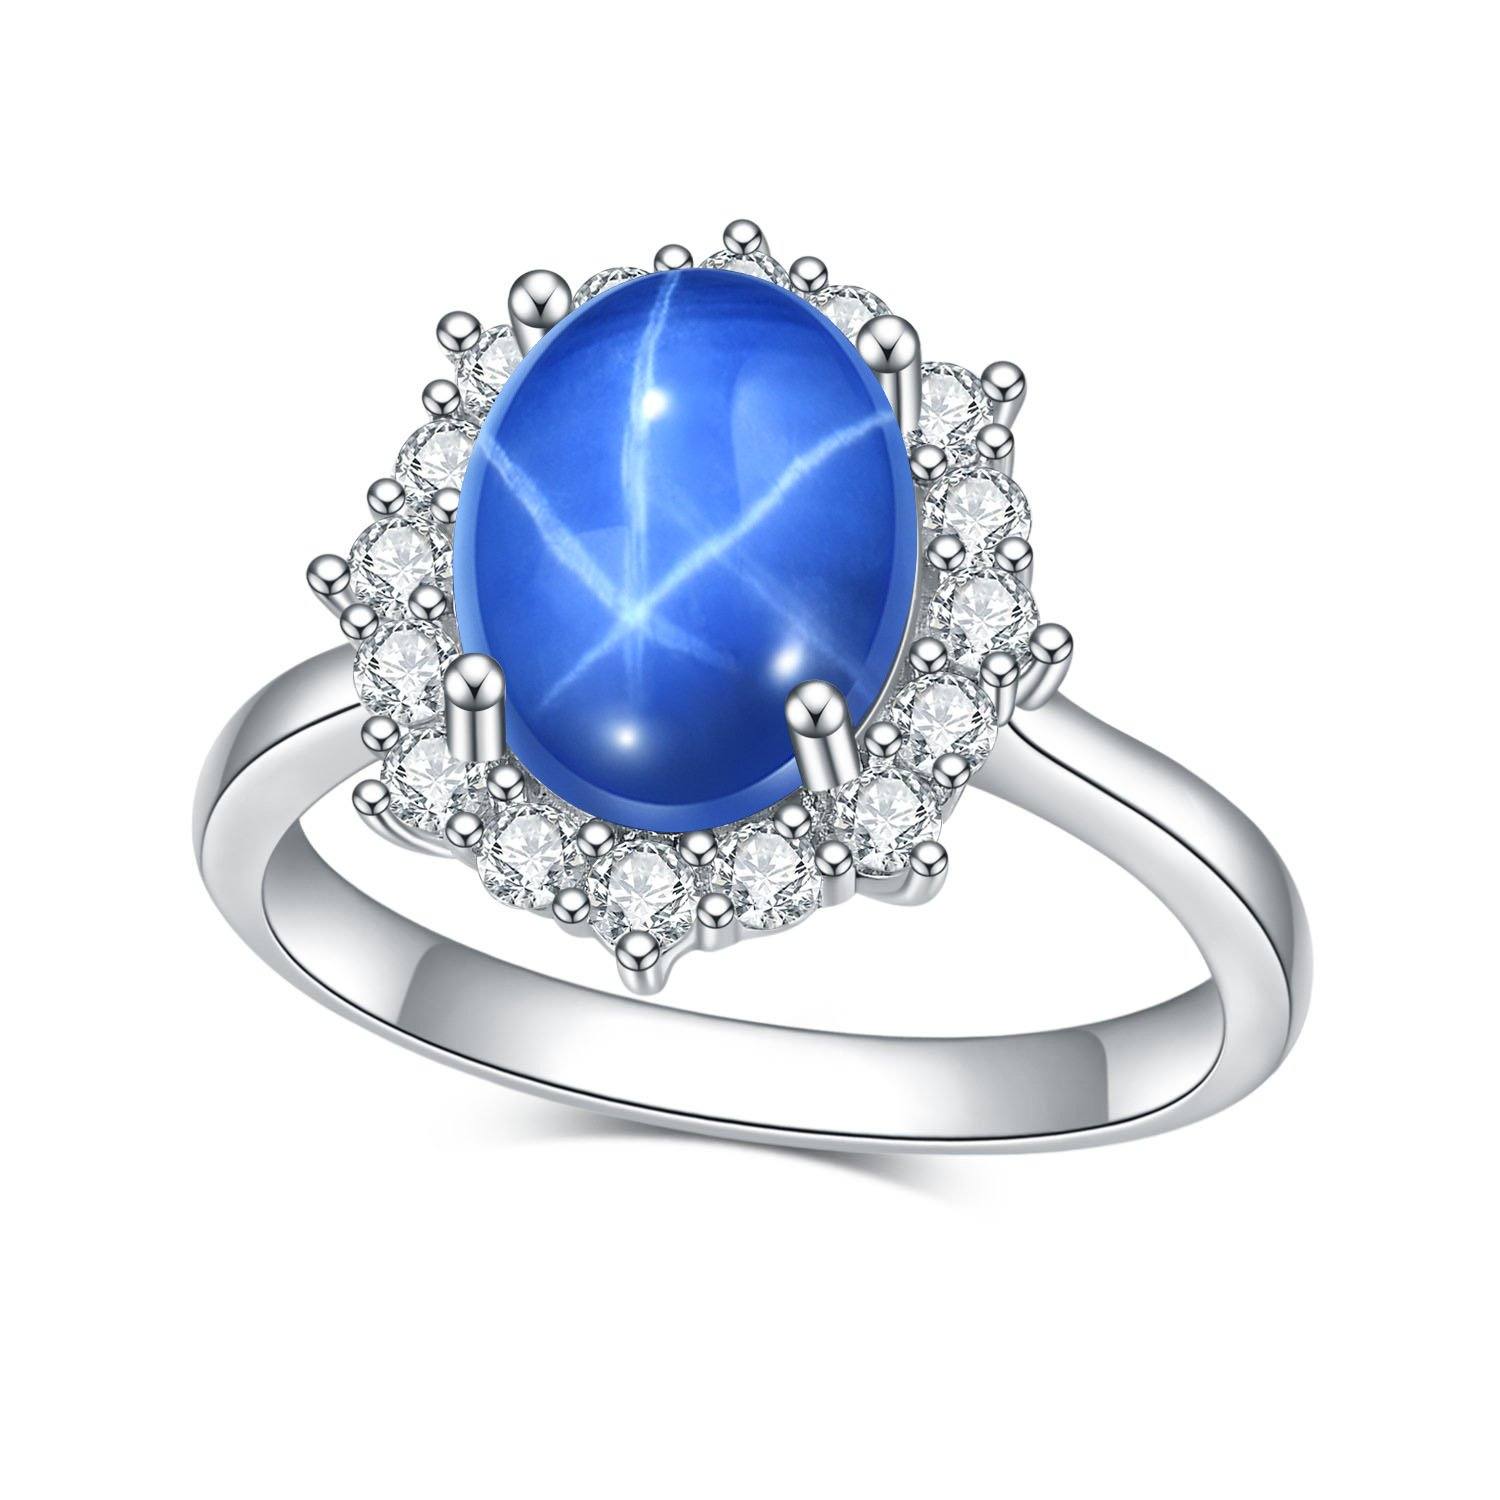 Star Sapphire Engagement Ring - HER'S